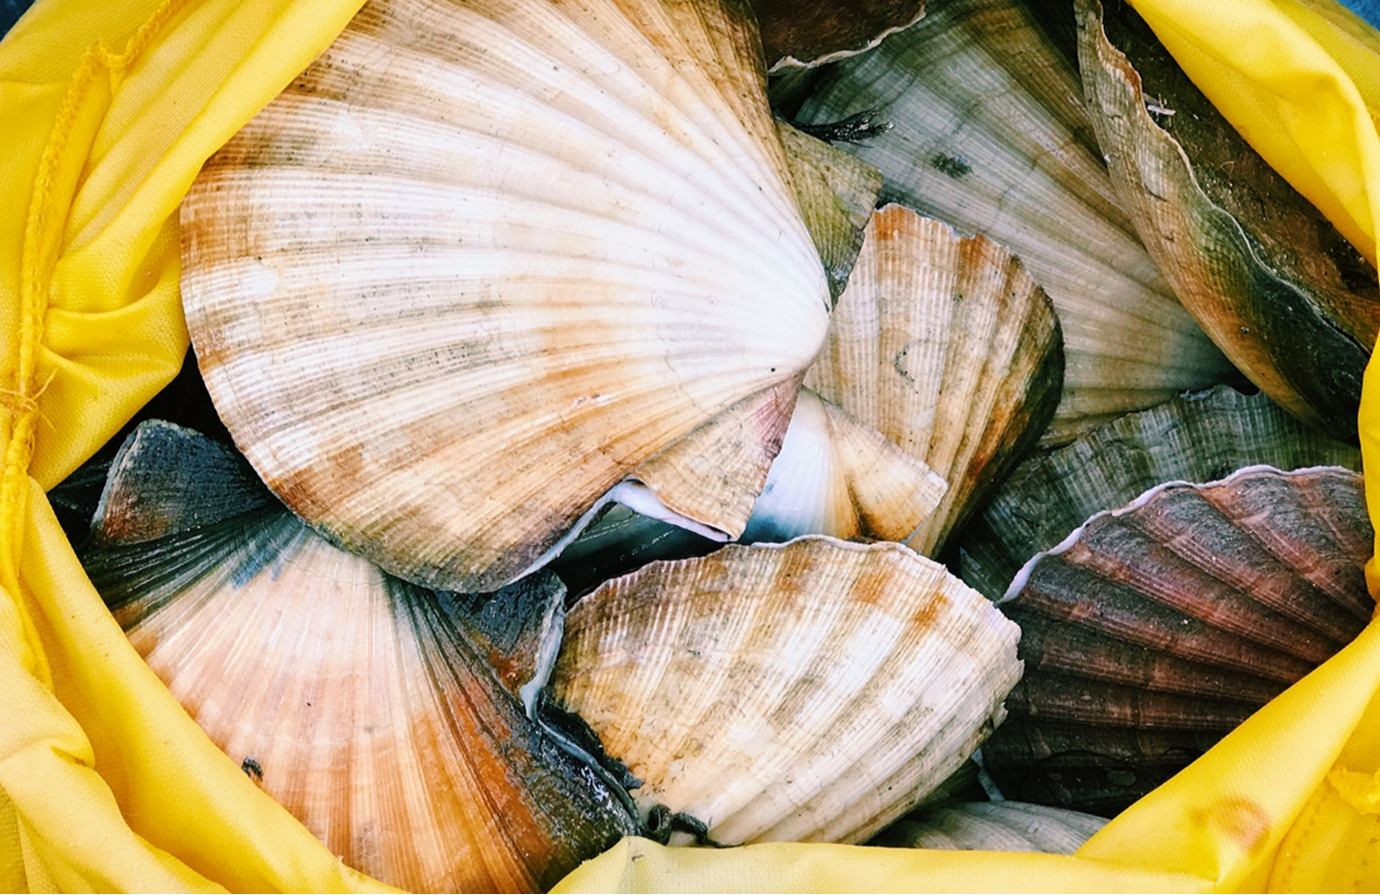 Bivalve mollusc sanitation: Growing area assessment and review